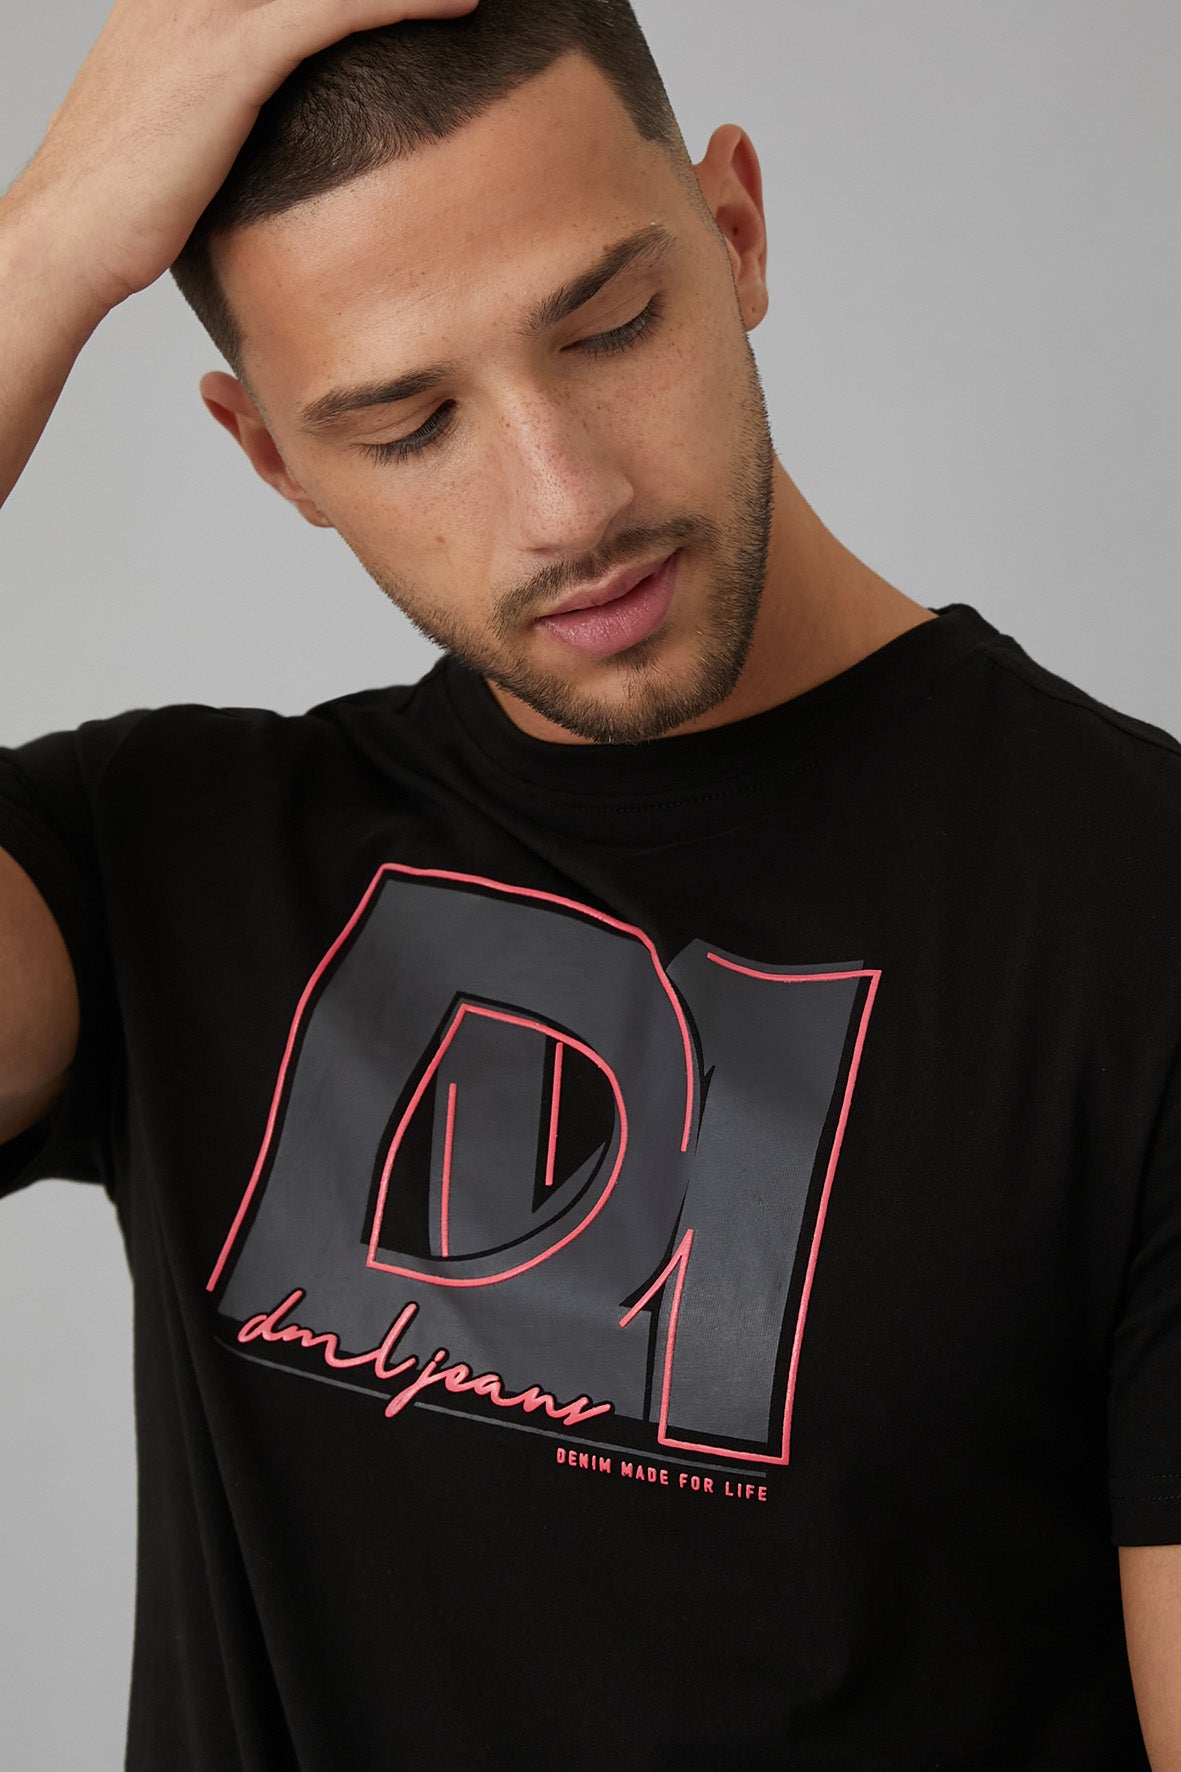 FUSION Printed crew neck t-shirt in BLACK - DML Jeans 